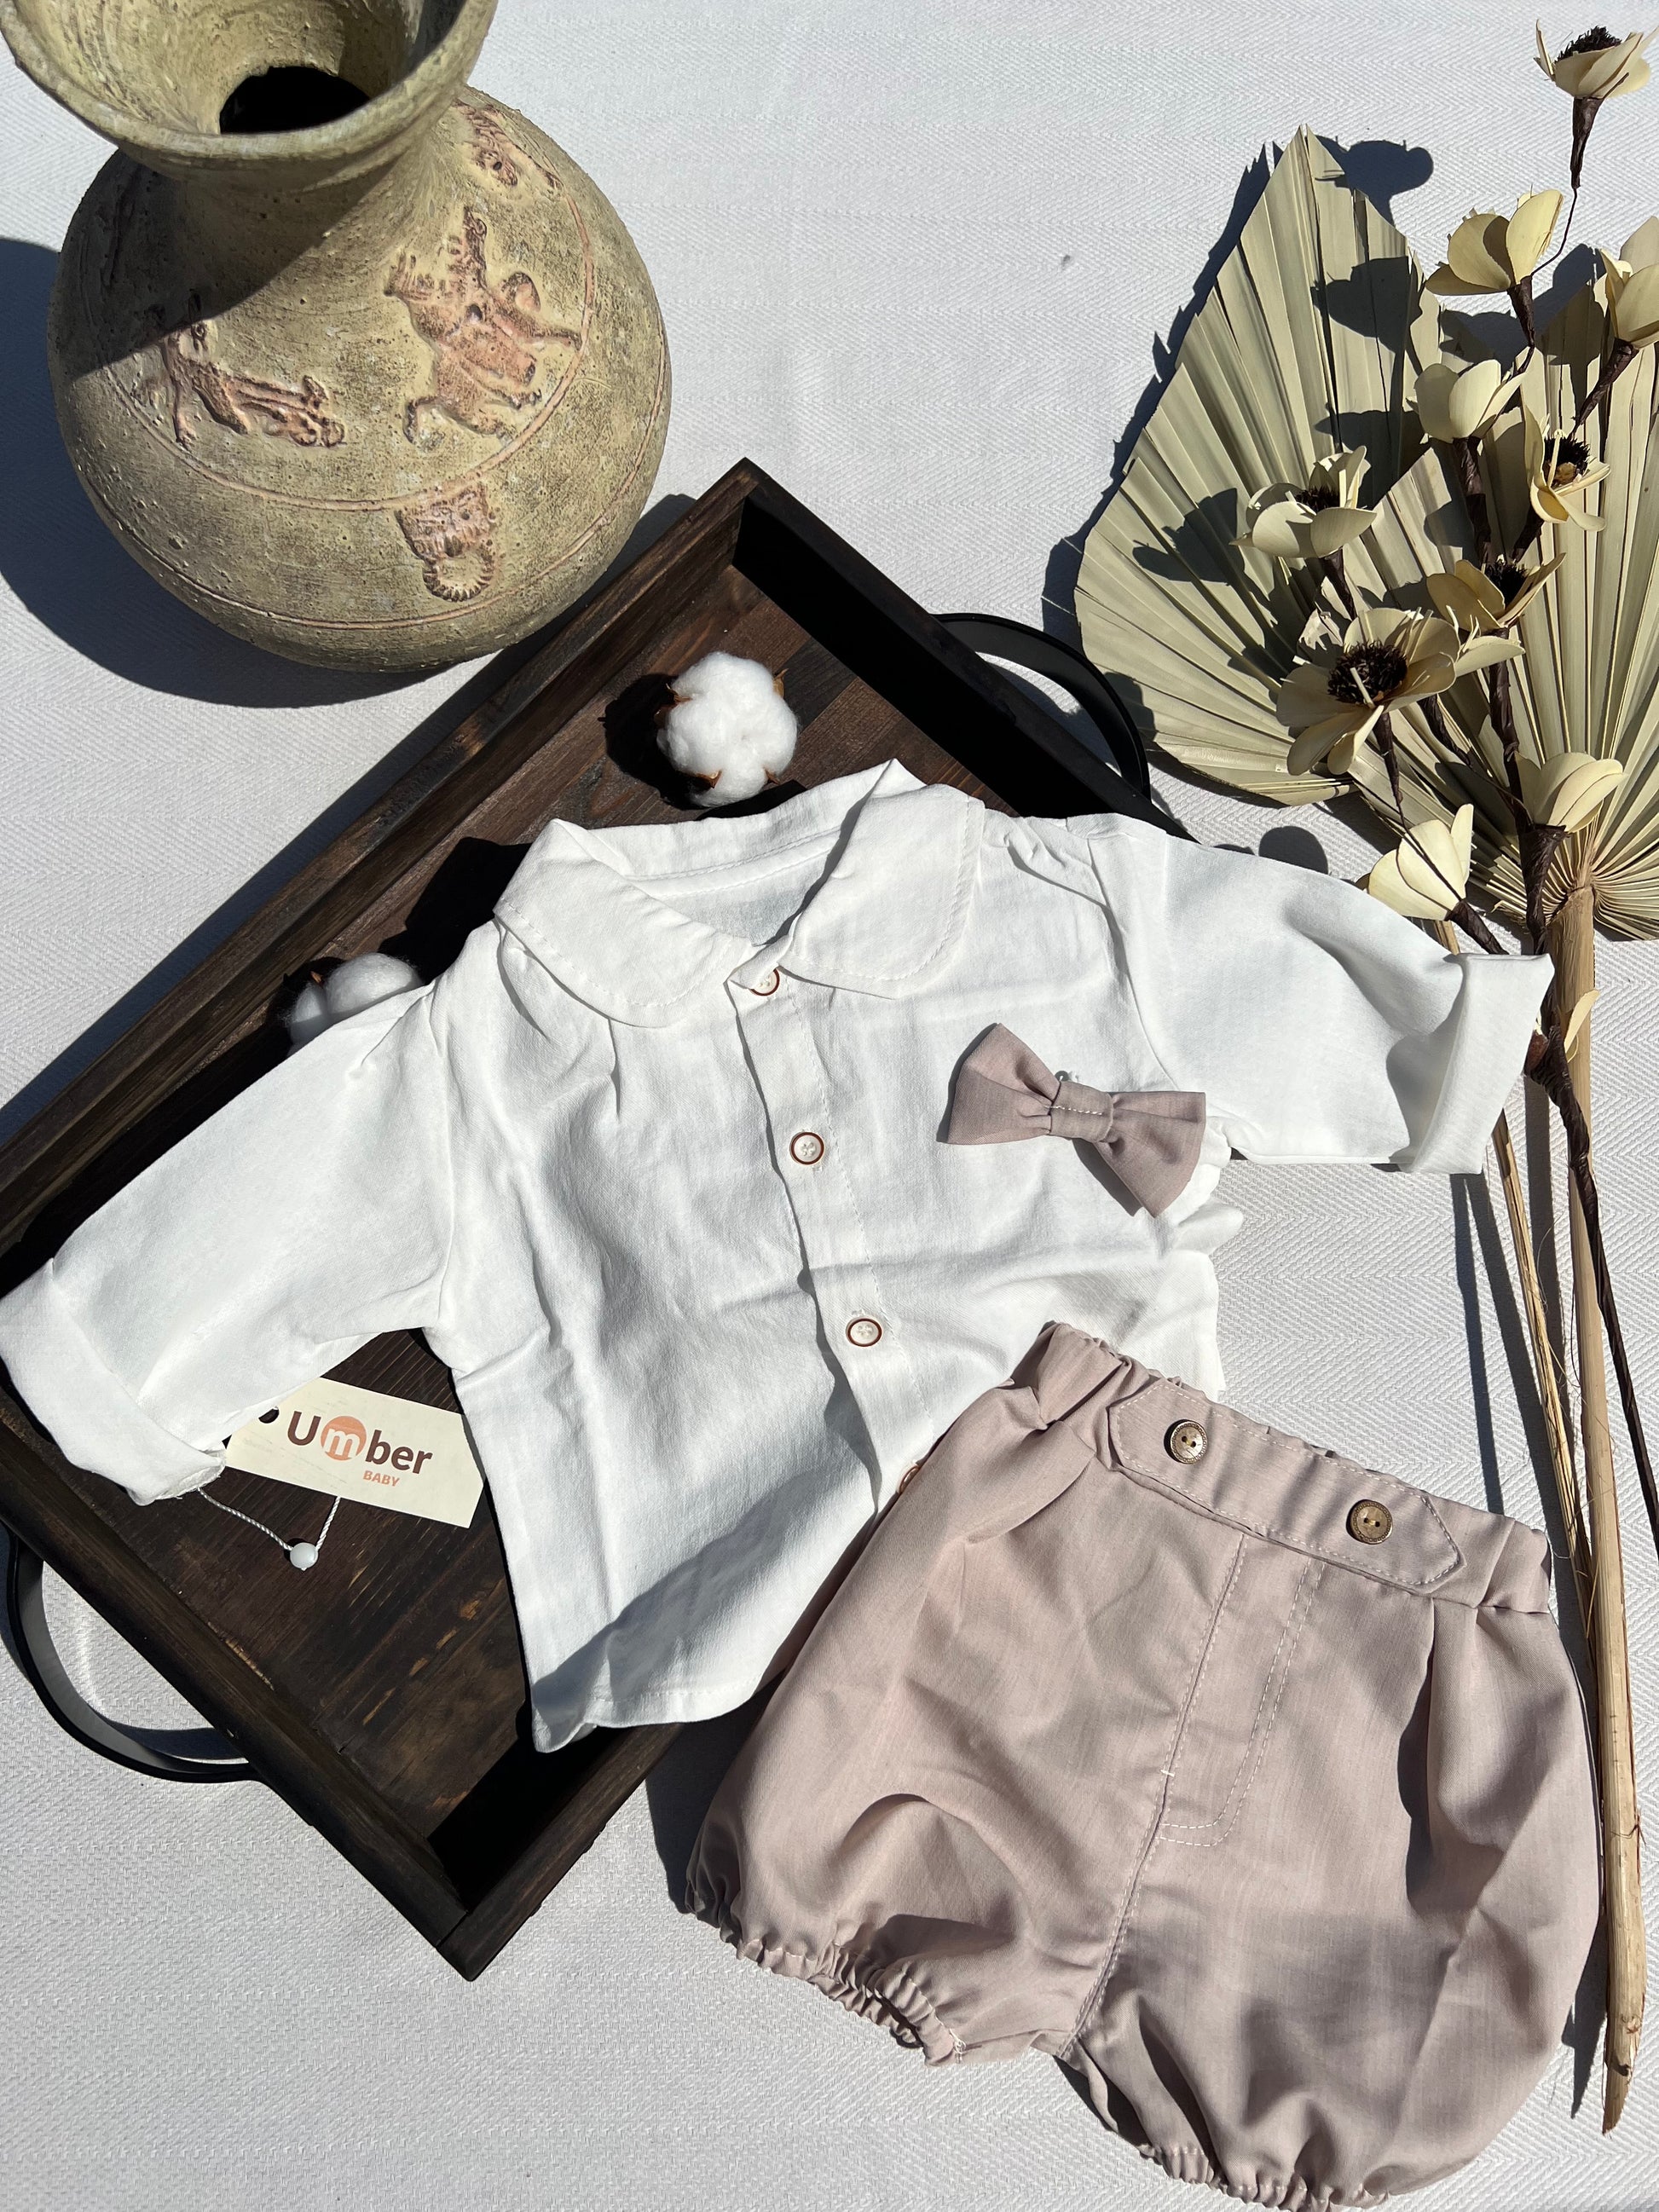 Formal Baby Three Piece Set with White Button-up Dress Shirt, Latte Colored Shorts, and Matching Bow Tie